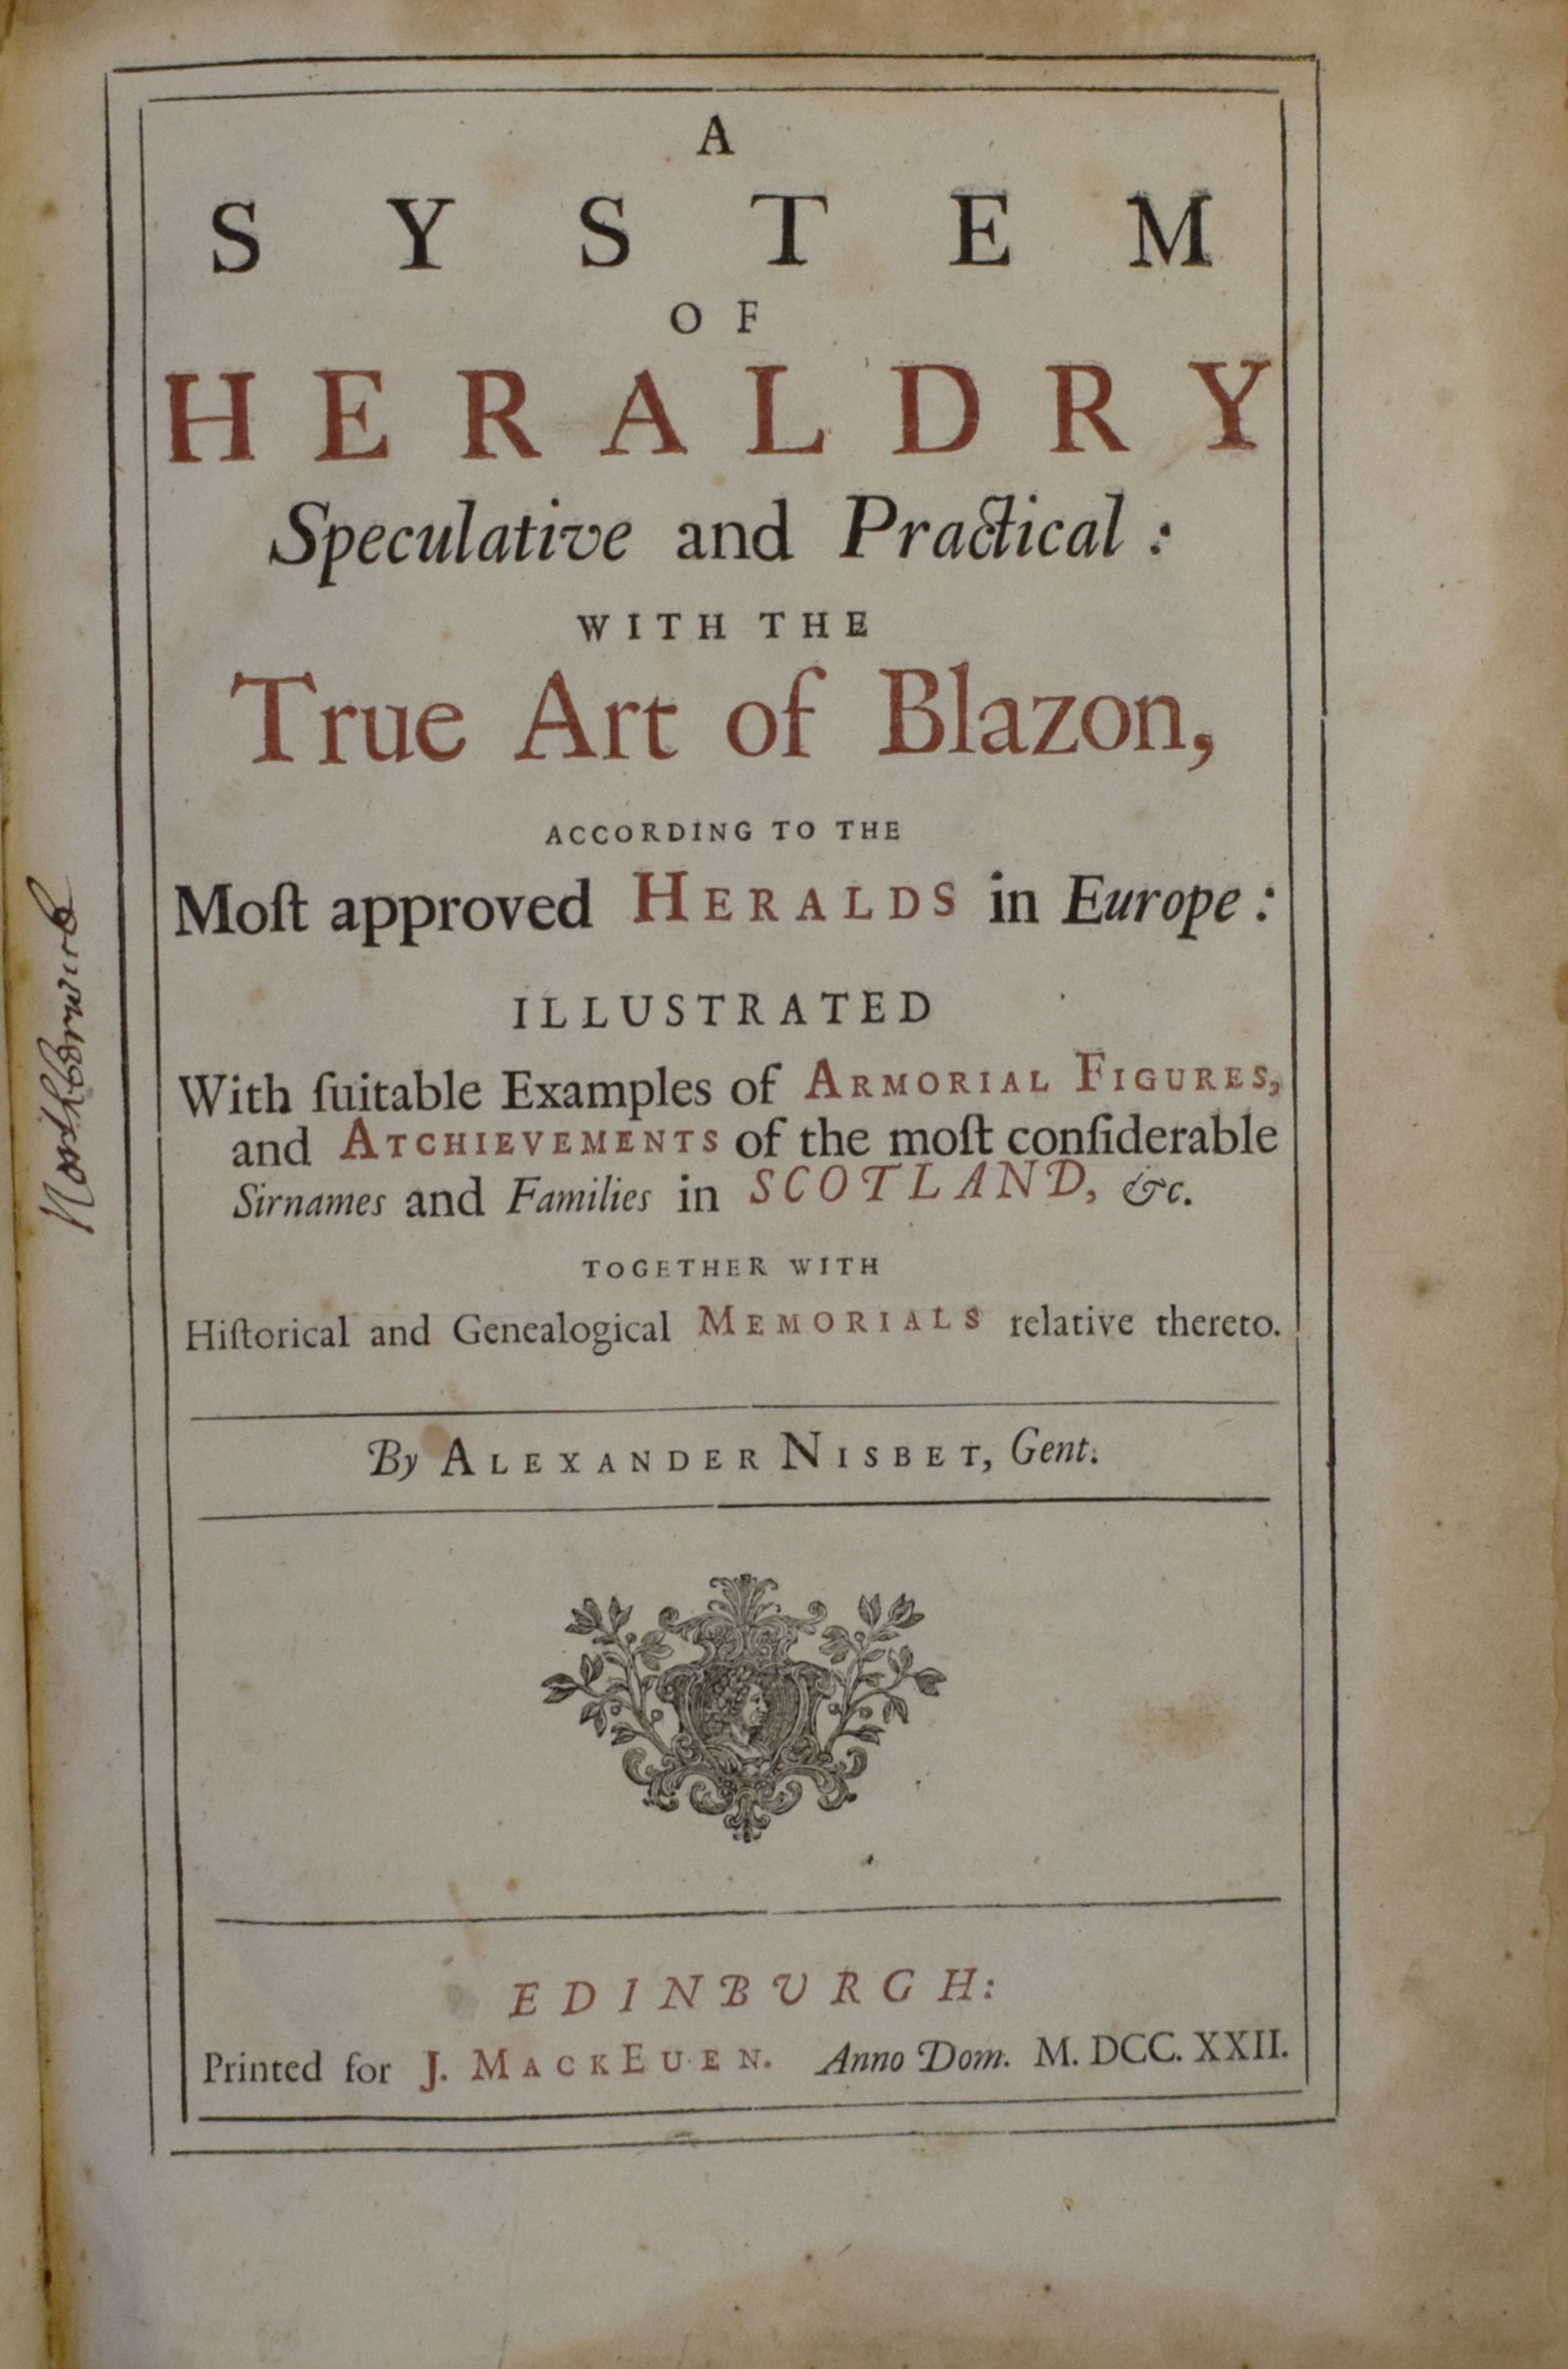 A System of Heraldry Speculative and Practical: with the True Art of Blazon, according to the Most Approved Heralds in Europe. Parts 1 & 2 in one Volume.